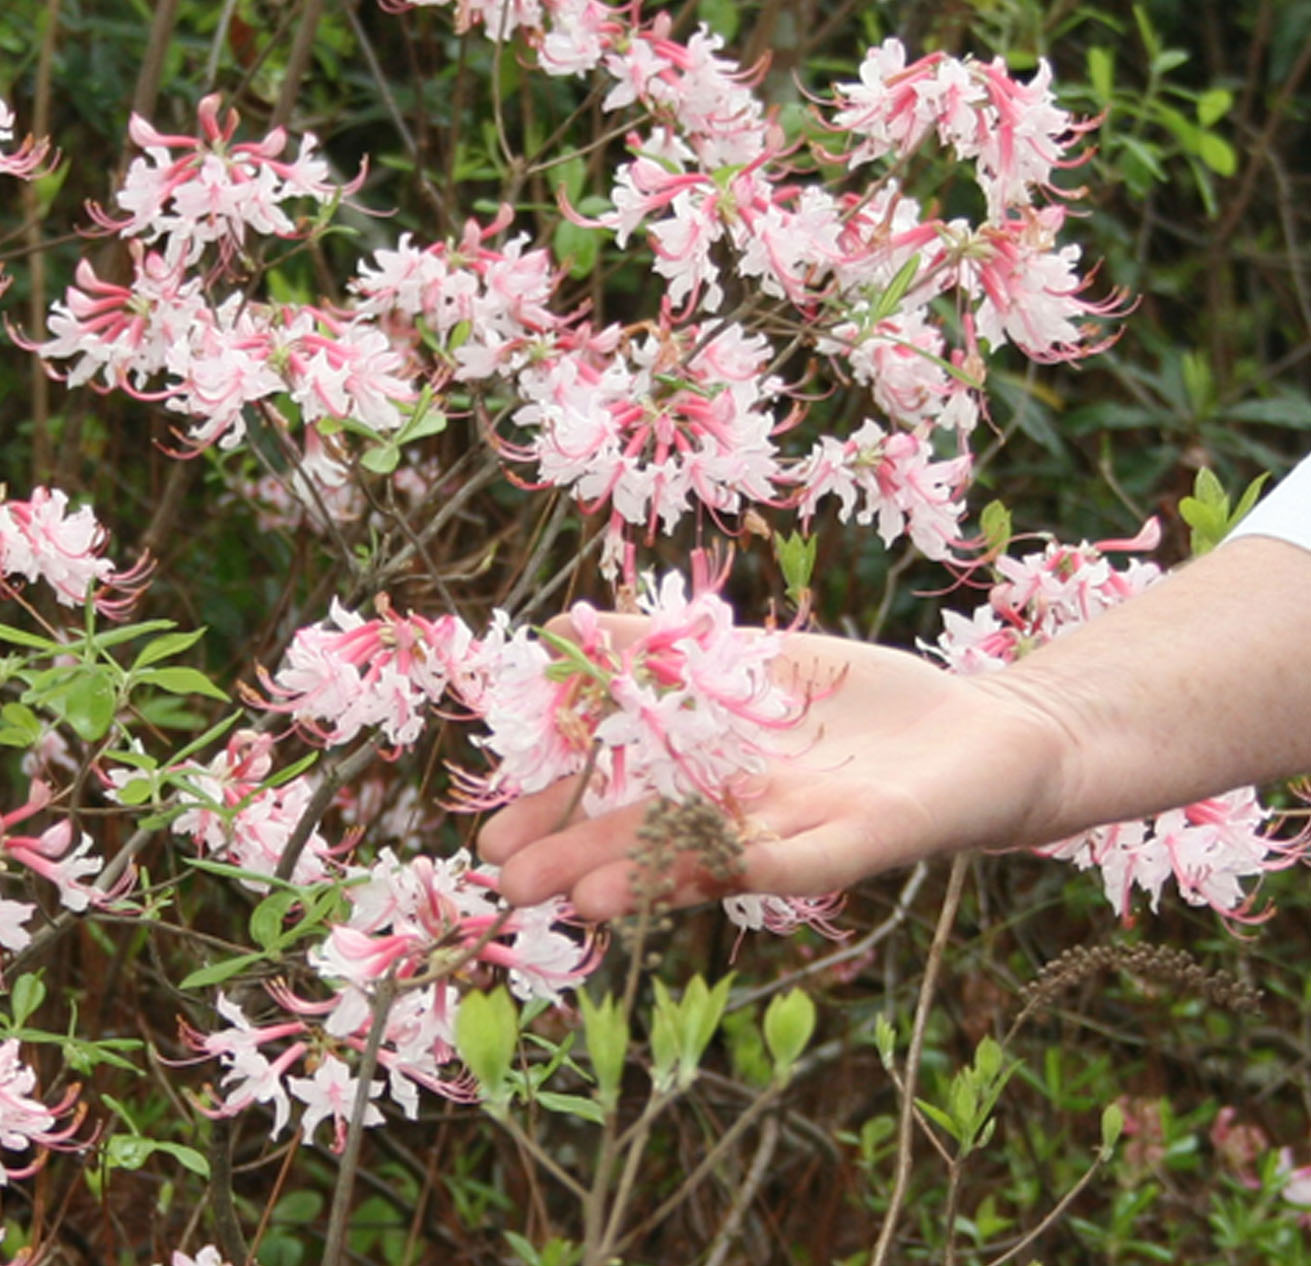 Pictured is a Piedmont Azalea growing in the Coastal Plain Research Arboretum on the Tifton campus of the University of Georgia.